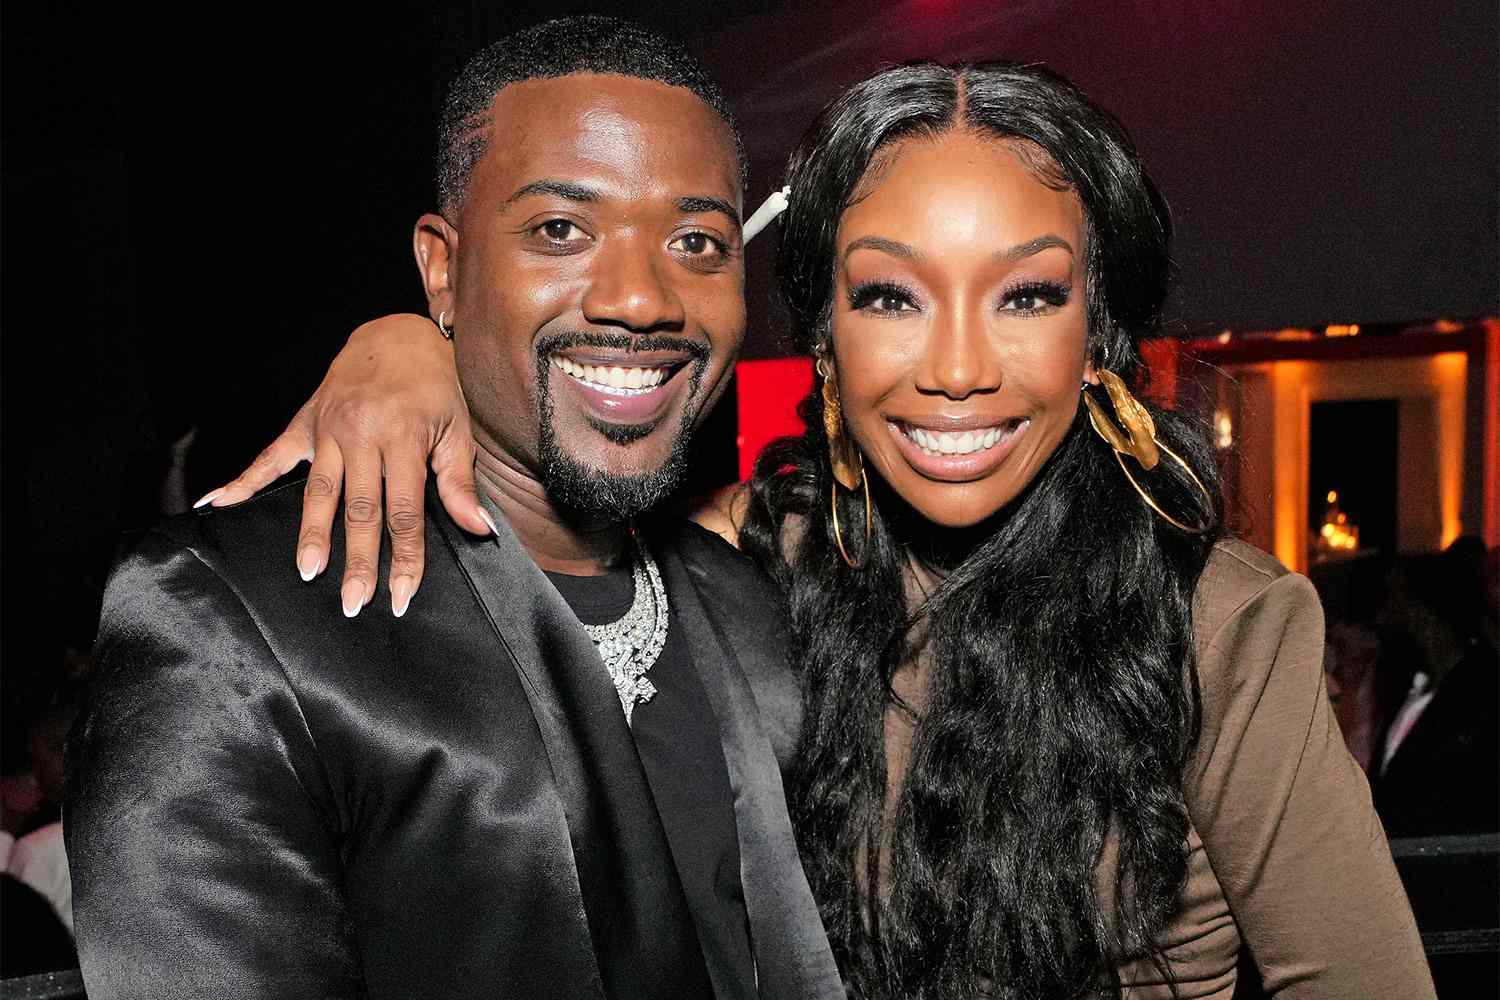 LOS ANGELES, CALIFORNIA - JUNE 26: Ray J and Brandy attend Sean "Diddy" Combs celebrates BET Lifetime Achievement after party powered by Meta, Ciroc Premium Vodka and DeLeon Tequila on June 26, 2022 in Los Angeles, California. (Photo by Kevin Mazur/Getty Images for Sean "Diddy" Combs)